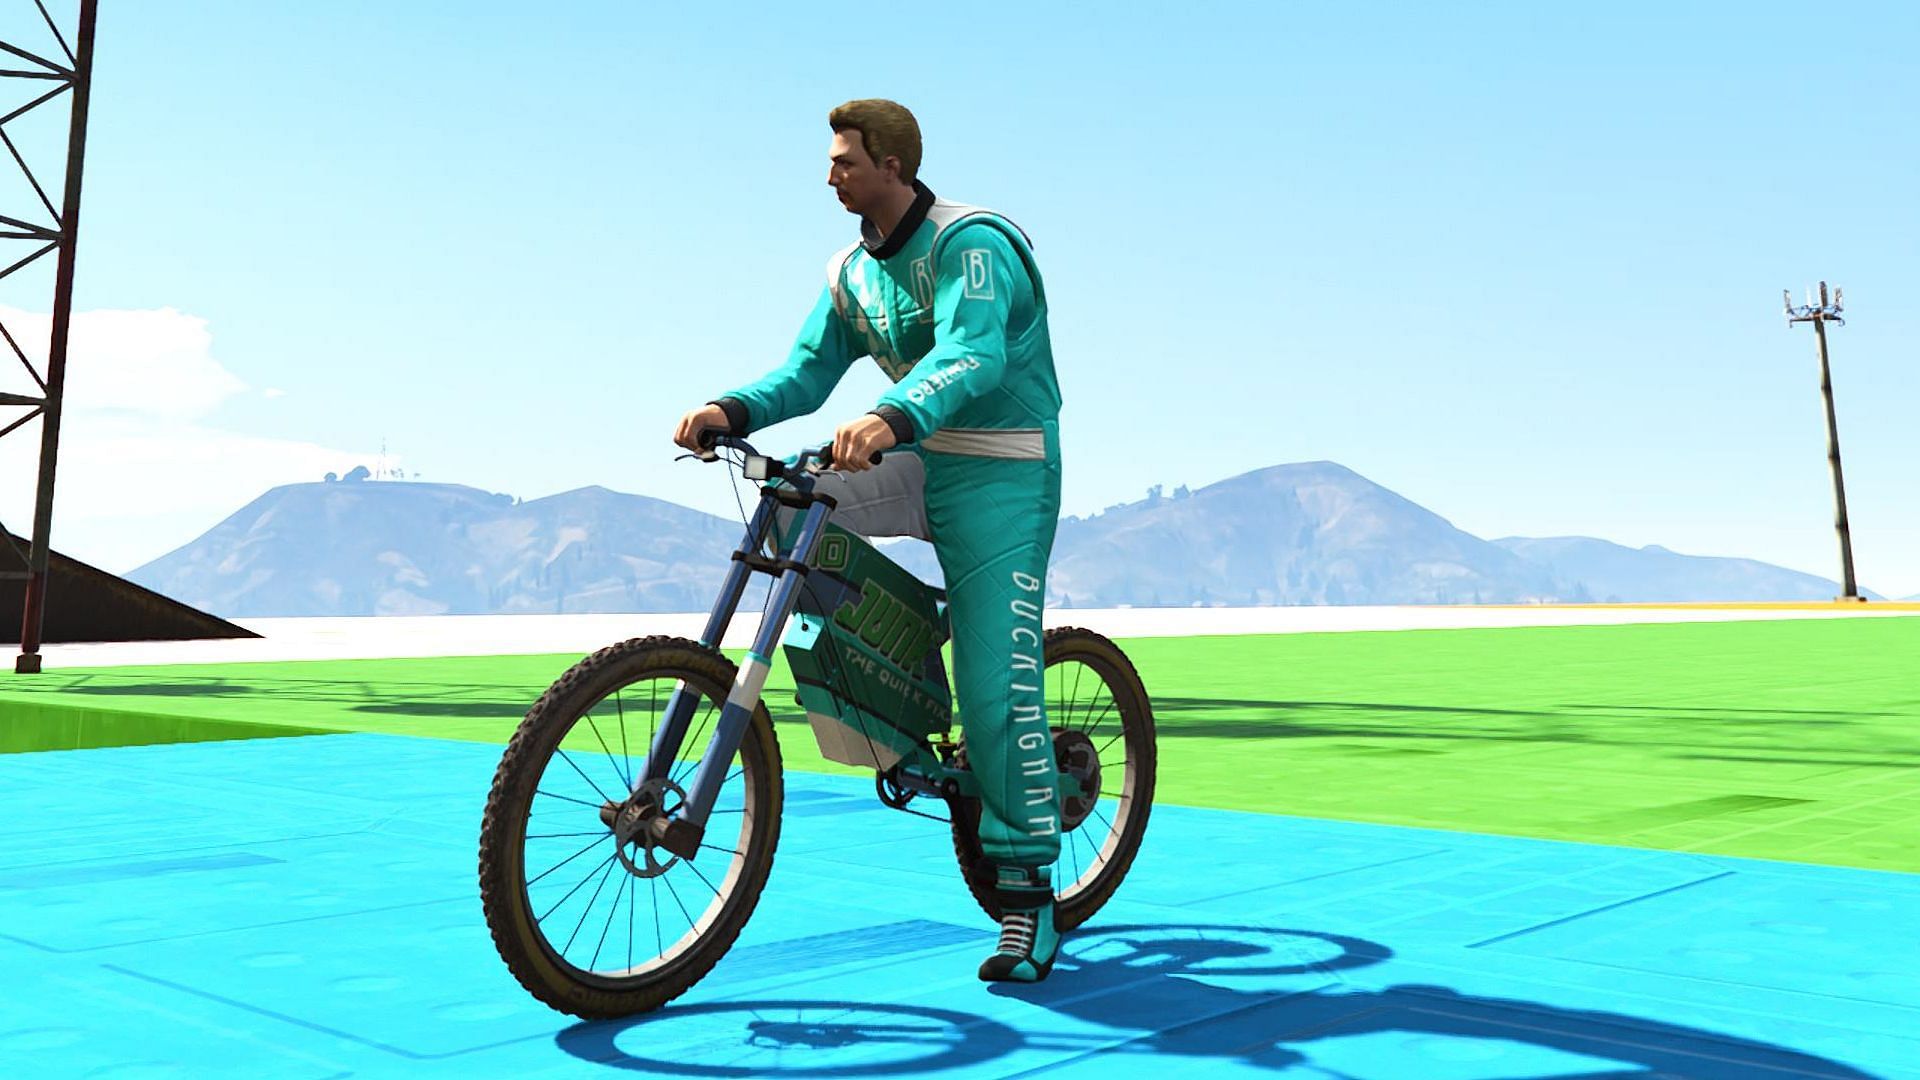 Bicycle fans can rejoice with this new ride (Image via Rockstar Games)